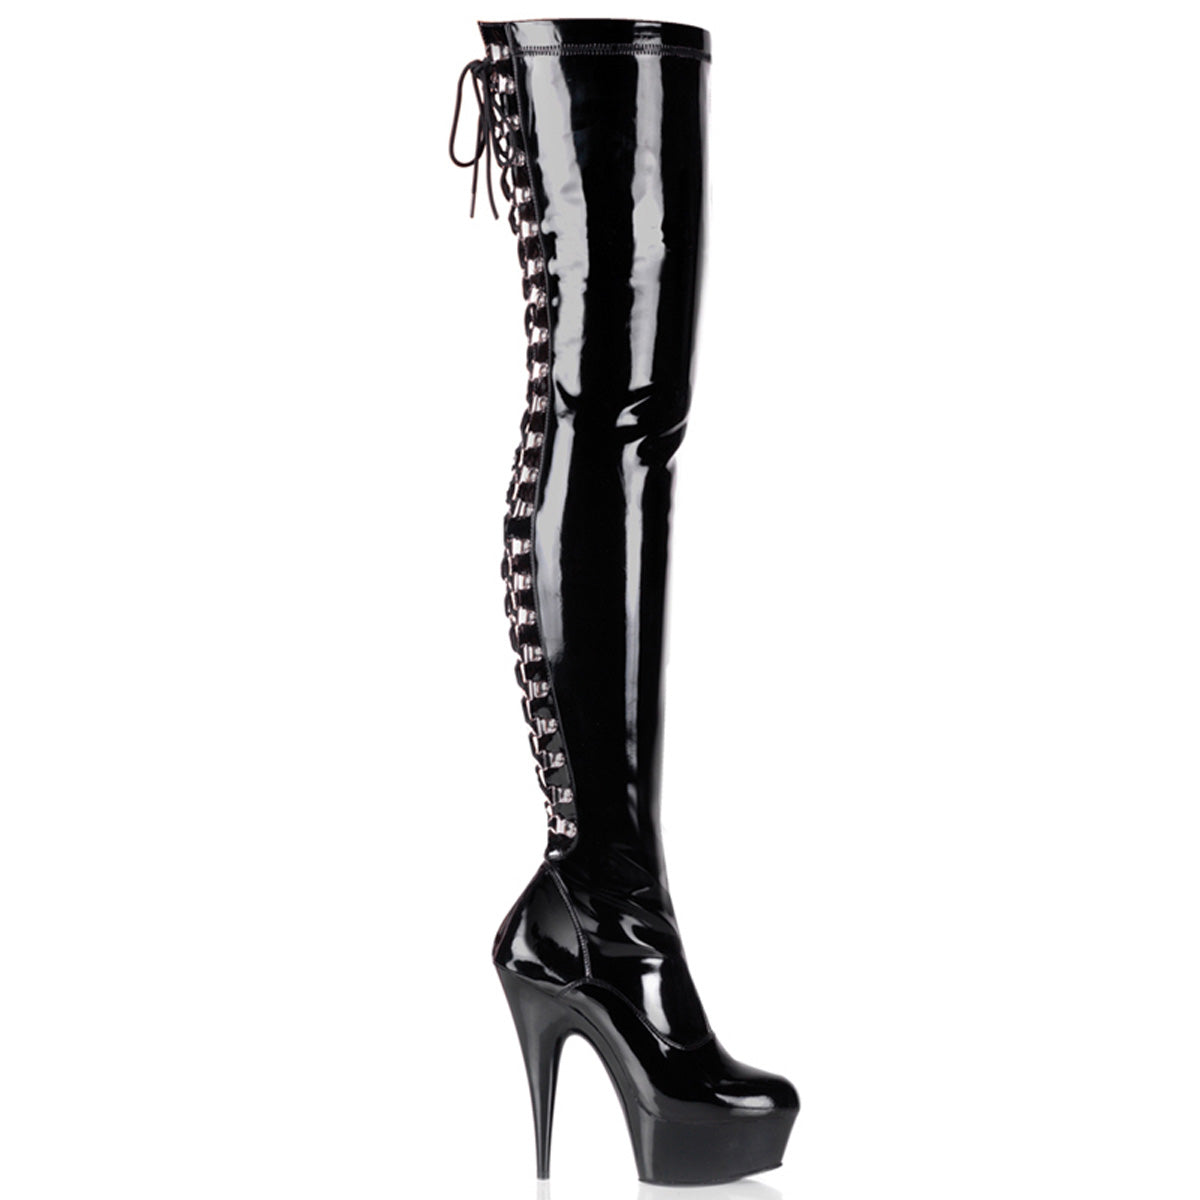 DELIGHT-3063 6" Heel Black Stretch Patent Pole Dancer Boots-Pleaser- Sexy Shoes